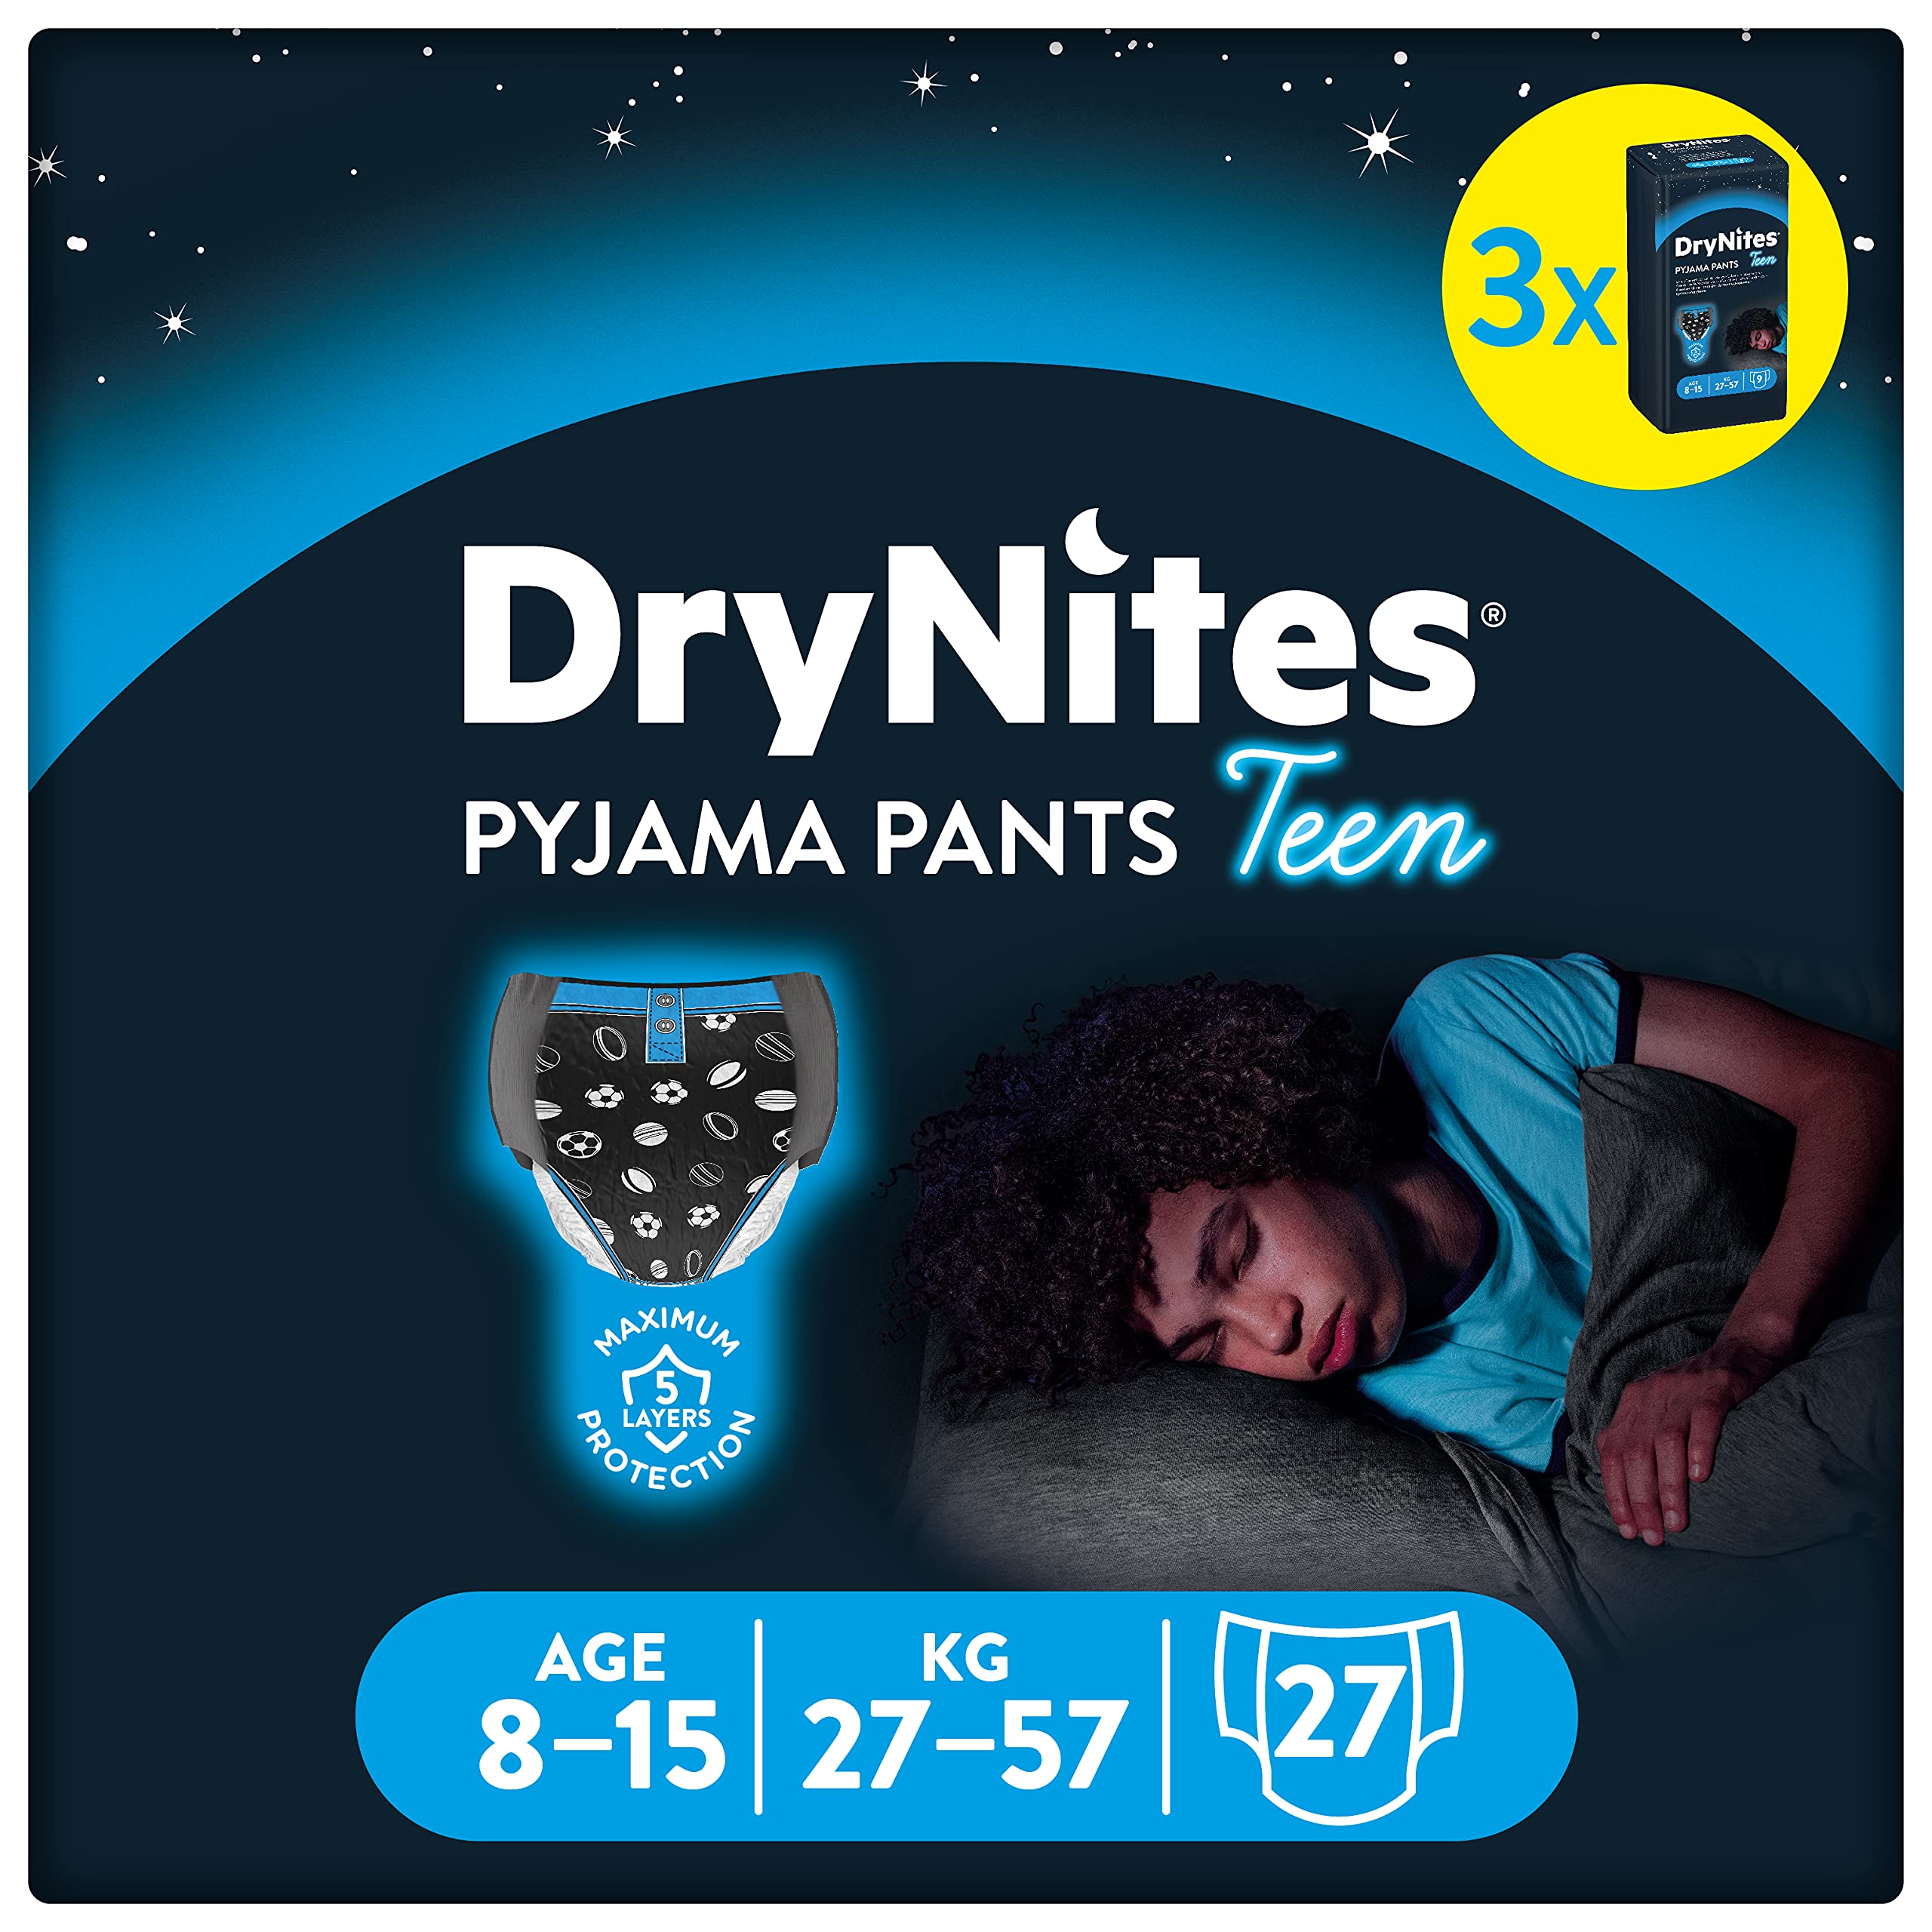 Huggies DryNites, Pyjama Pants for Boys - Sizes 8-15 Years (27 Pants) - Night Time Pants for Child and Teen BedWetting - Unbeatable Protection and Discrete Design